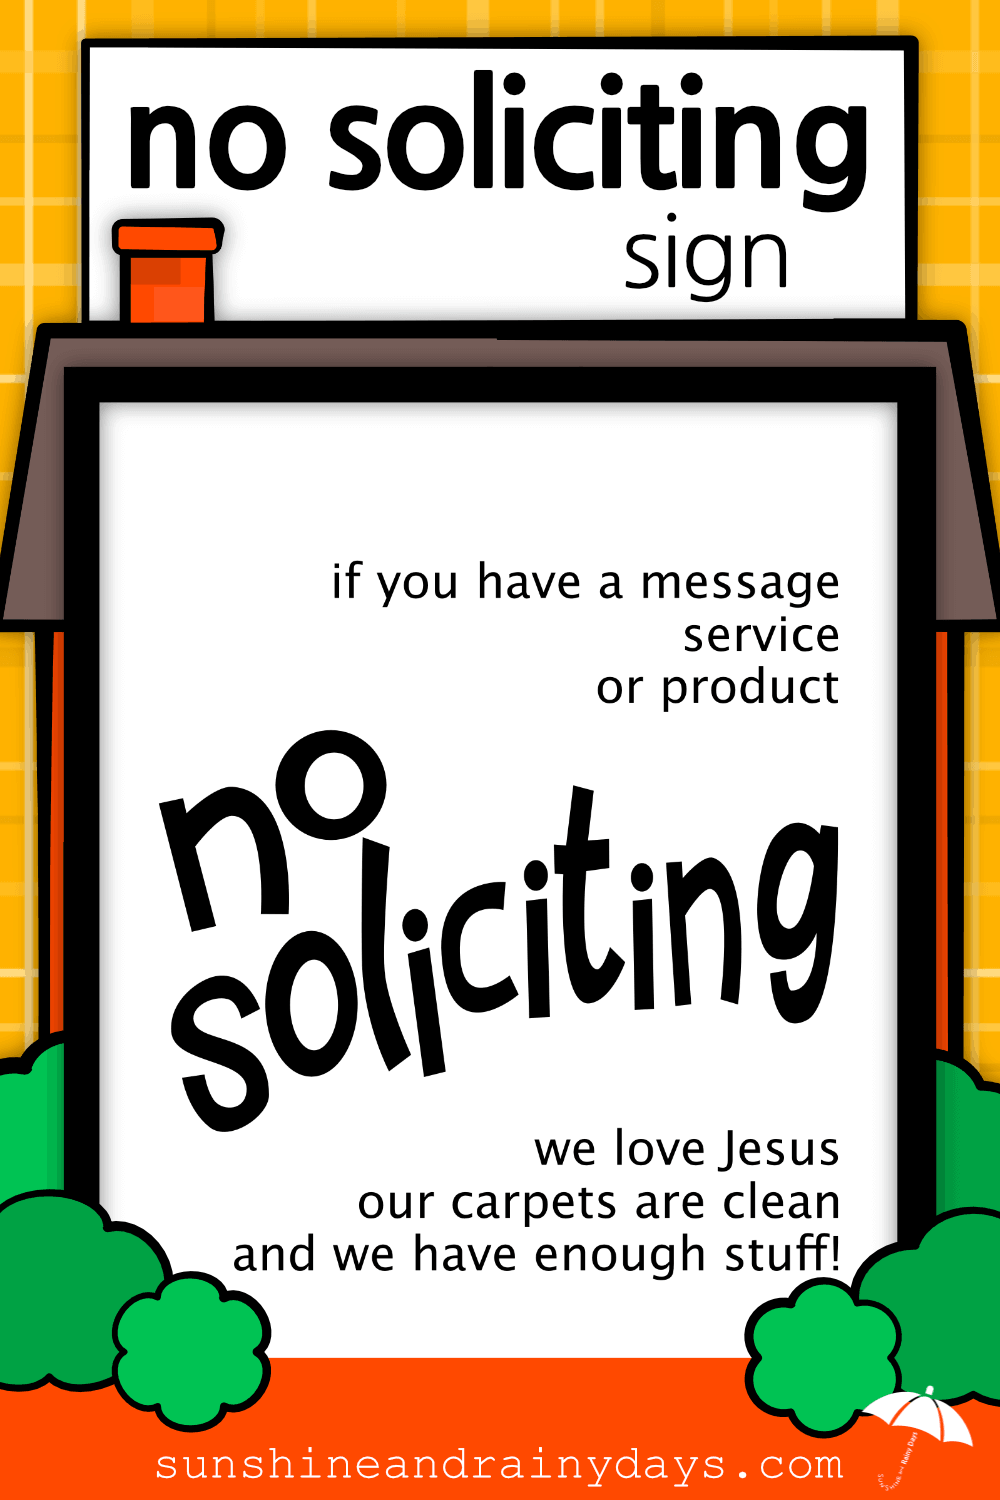 no-soliciting-sign-sunshine-and-rainy-days